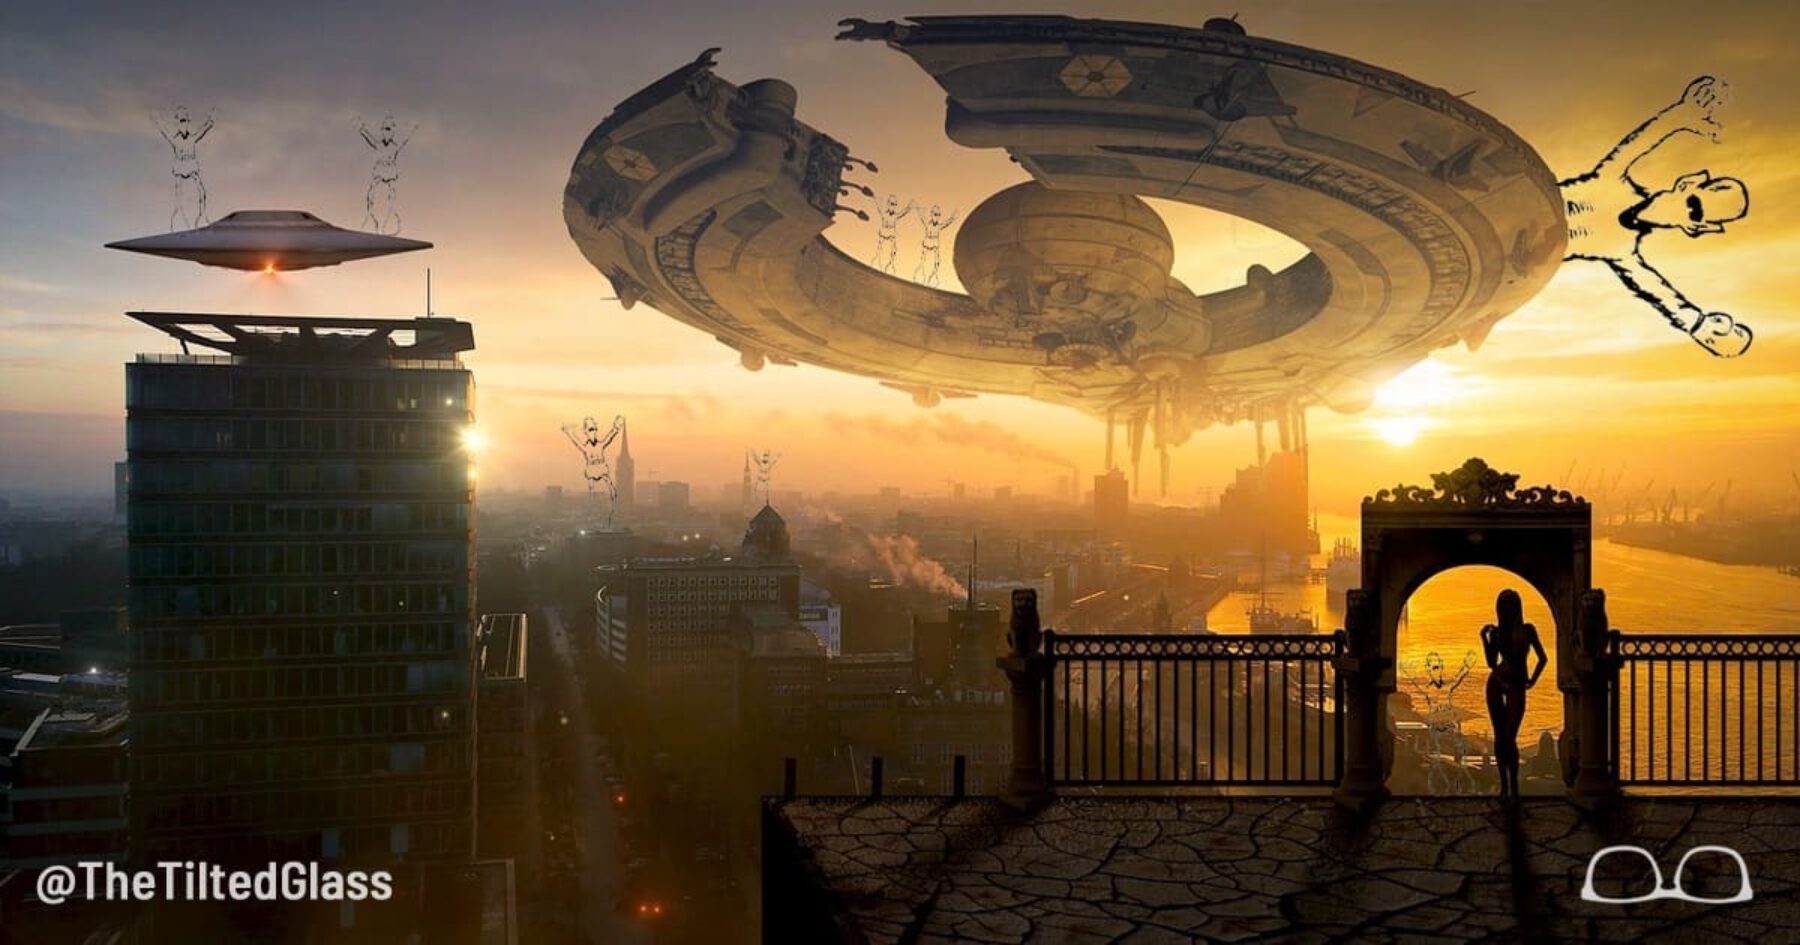 NASA Will Send Aliens to Earth by 2020